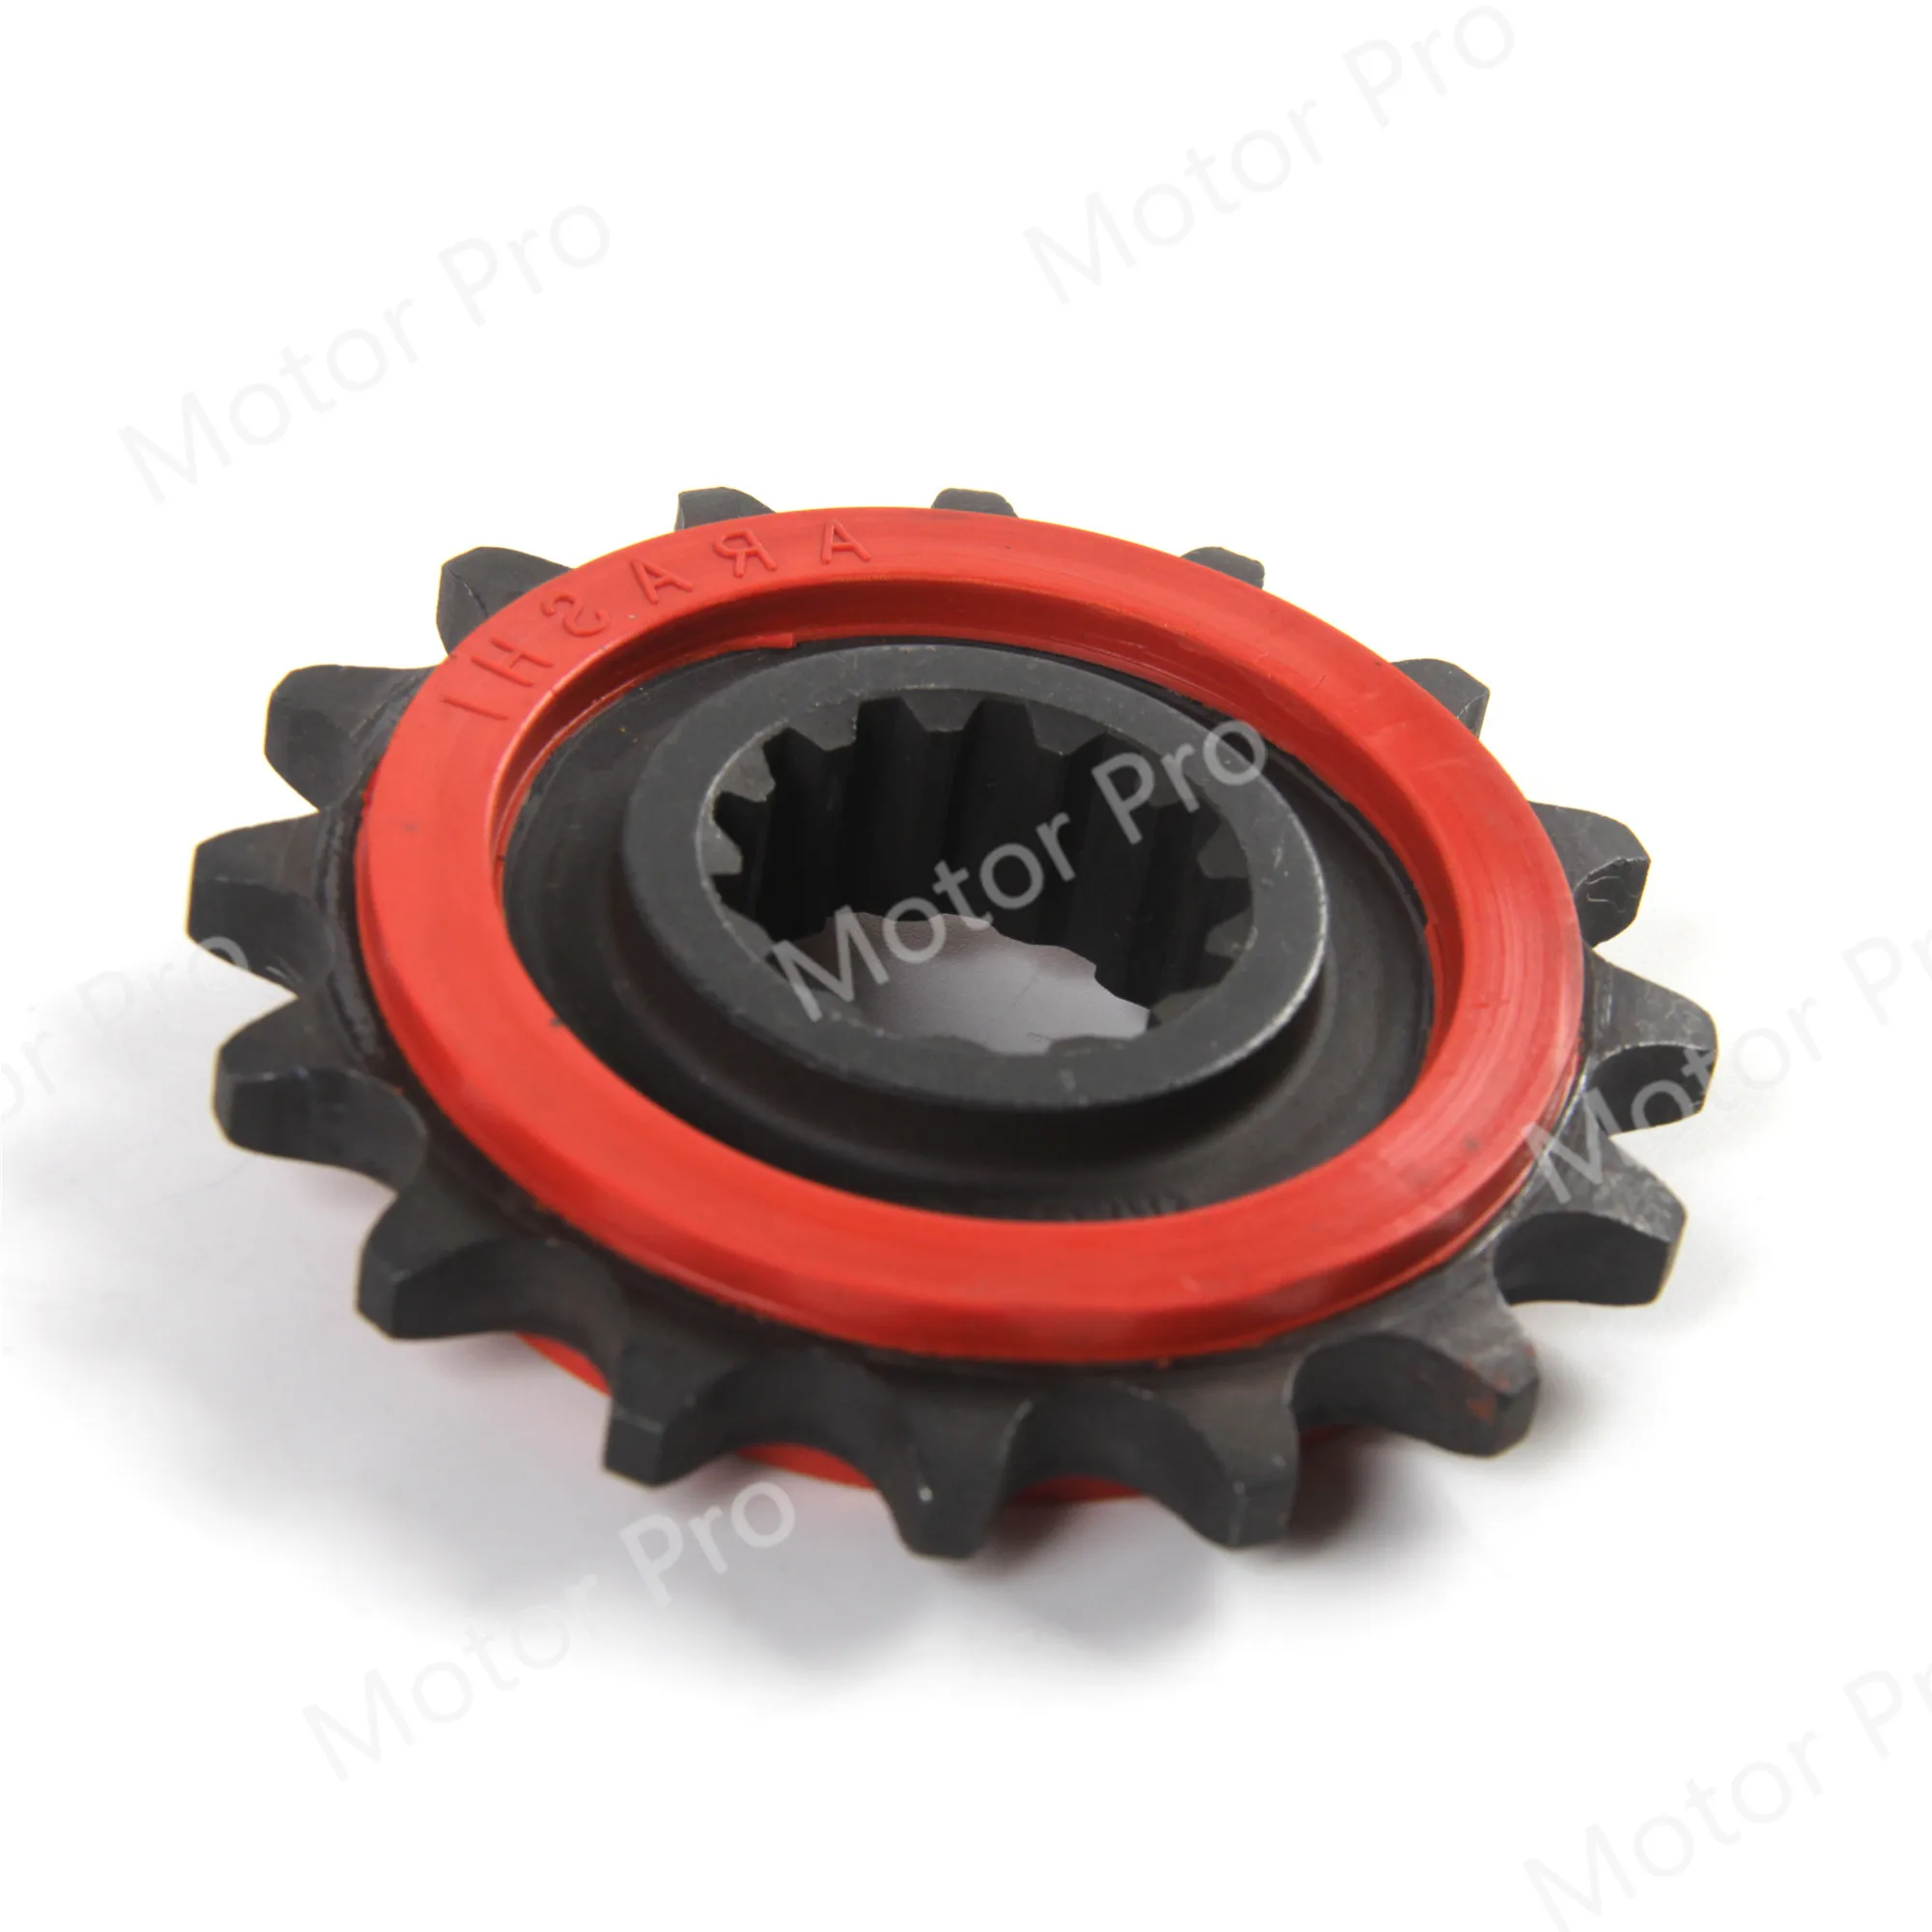 Motorcycle 16T Front Sprocket For HONDA CBR600 CBR600RR PC37 PC40 2003 2004 2005 2006 2007 - 2020 Gear Chain Sprocket 525 Pitch